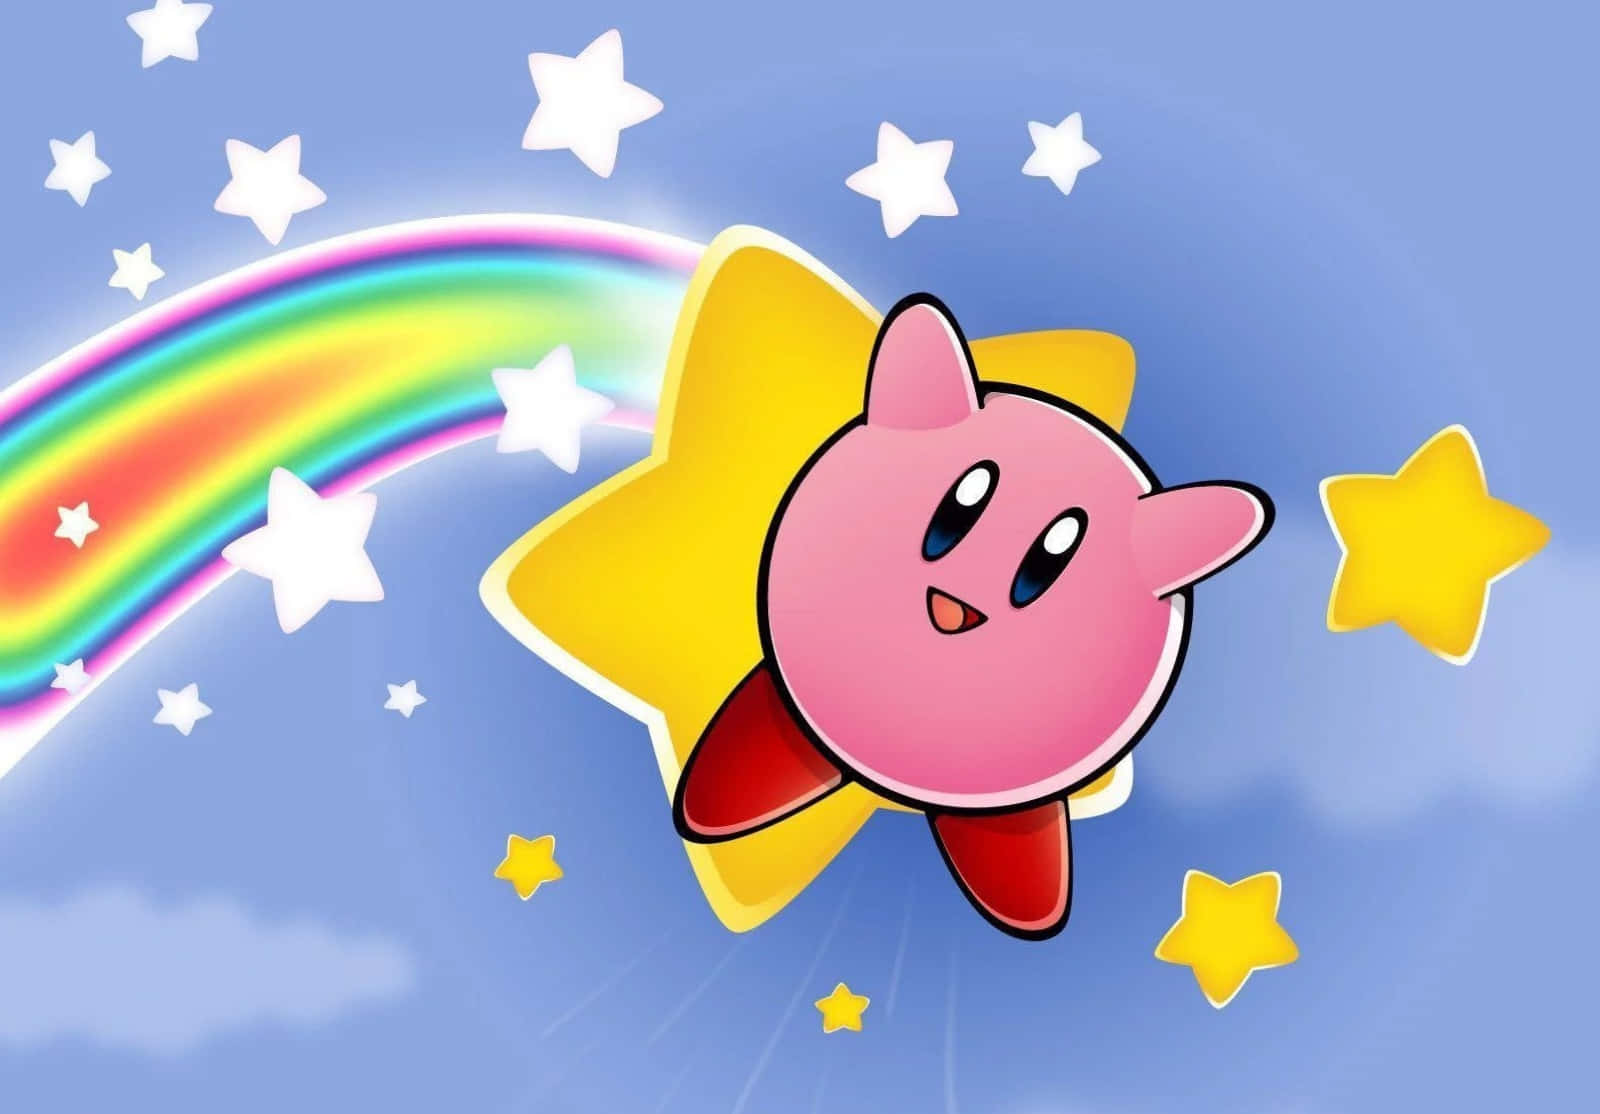 Cartoon Character Kirby Flying Through a Brightly Colored Landscape